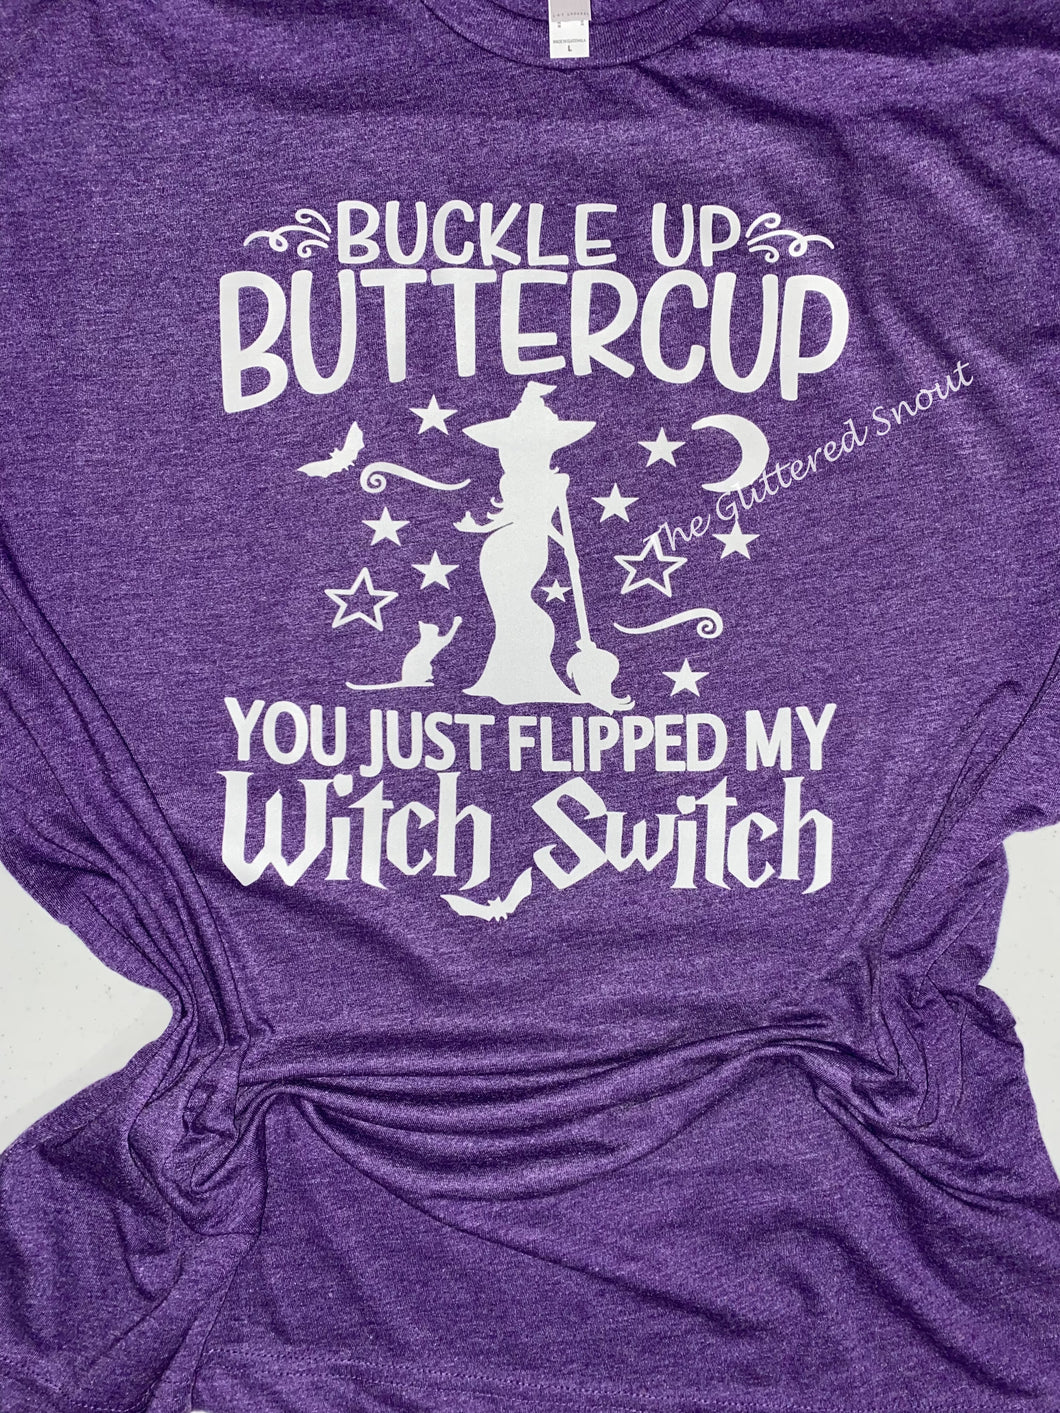 Buckle up buttercup- witch